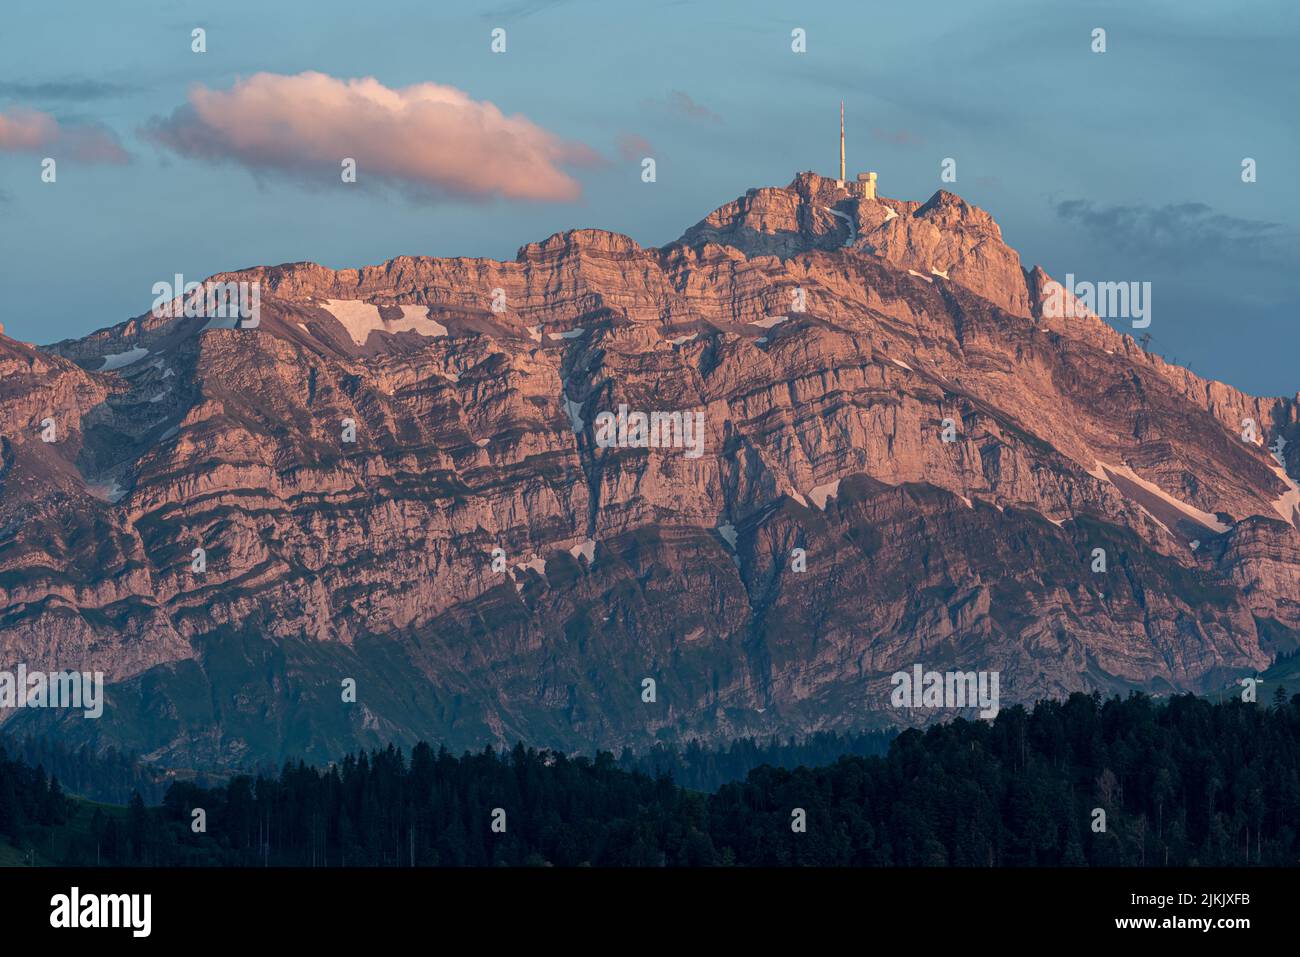 A scenic view of an Alpstein and Santis mountain during the sunset Stock Photo